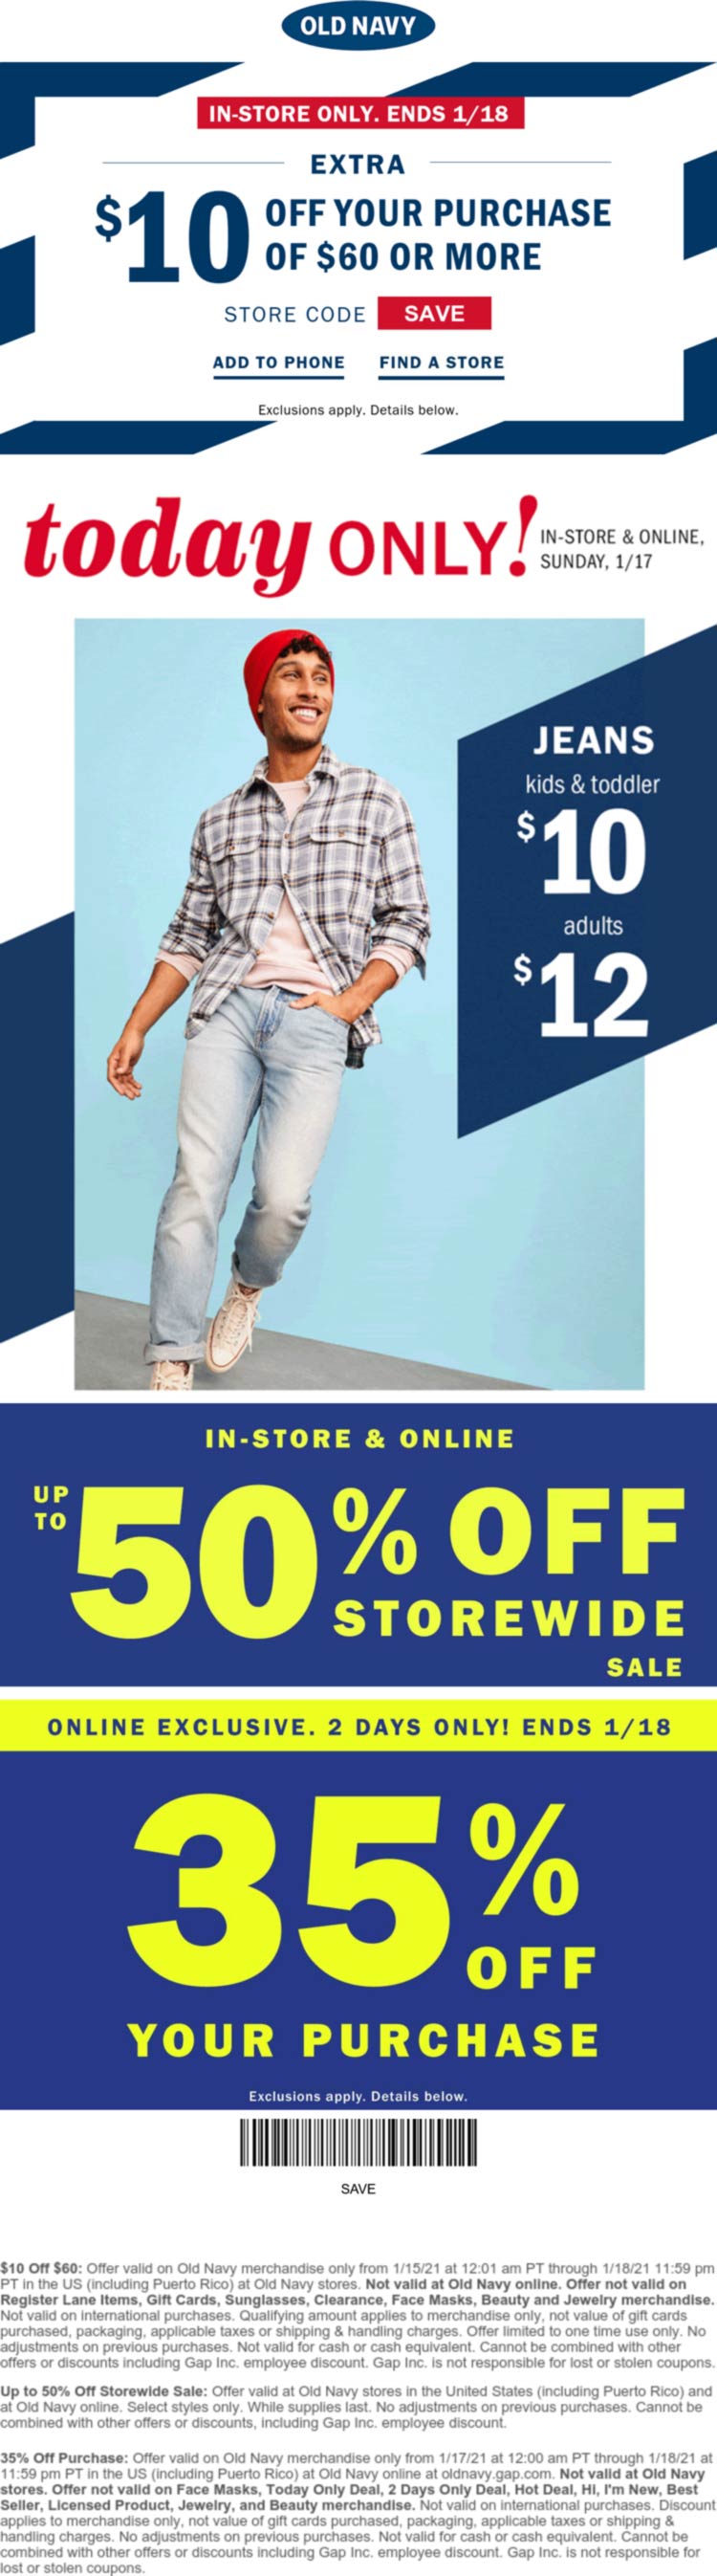 10-off-60-more-at-old-navy-oldnavy-the-coupons-app